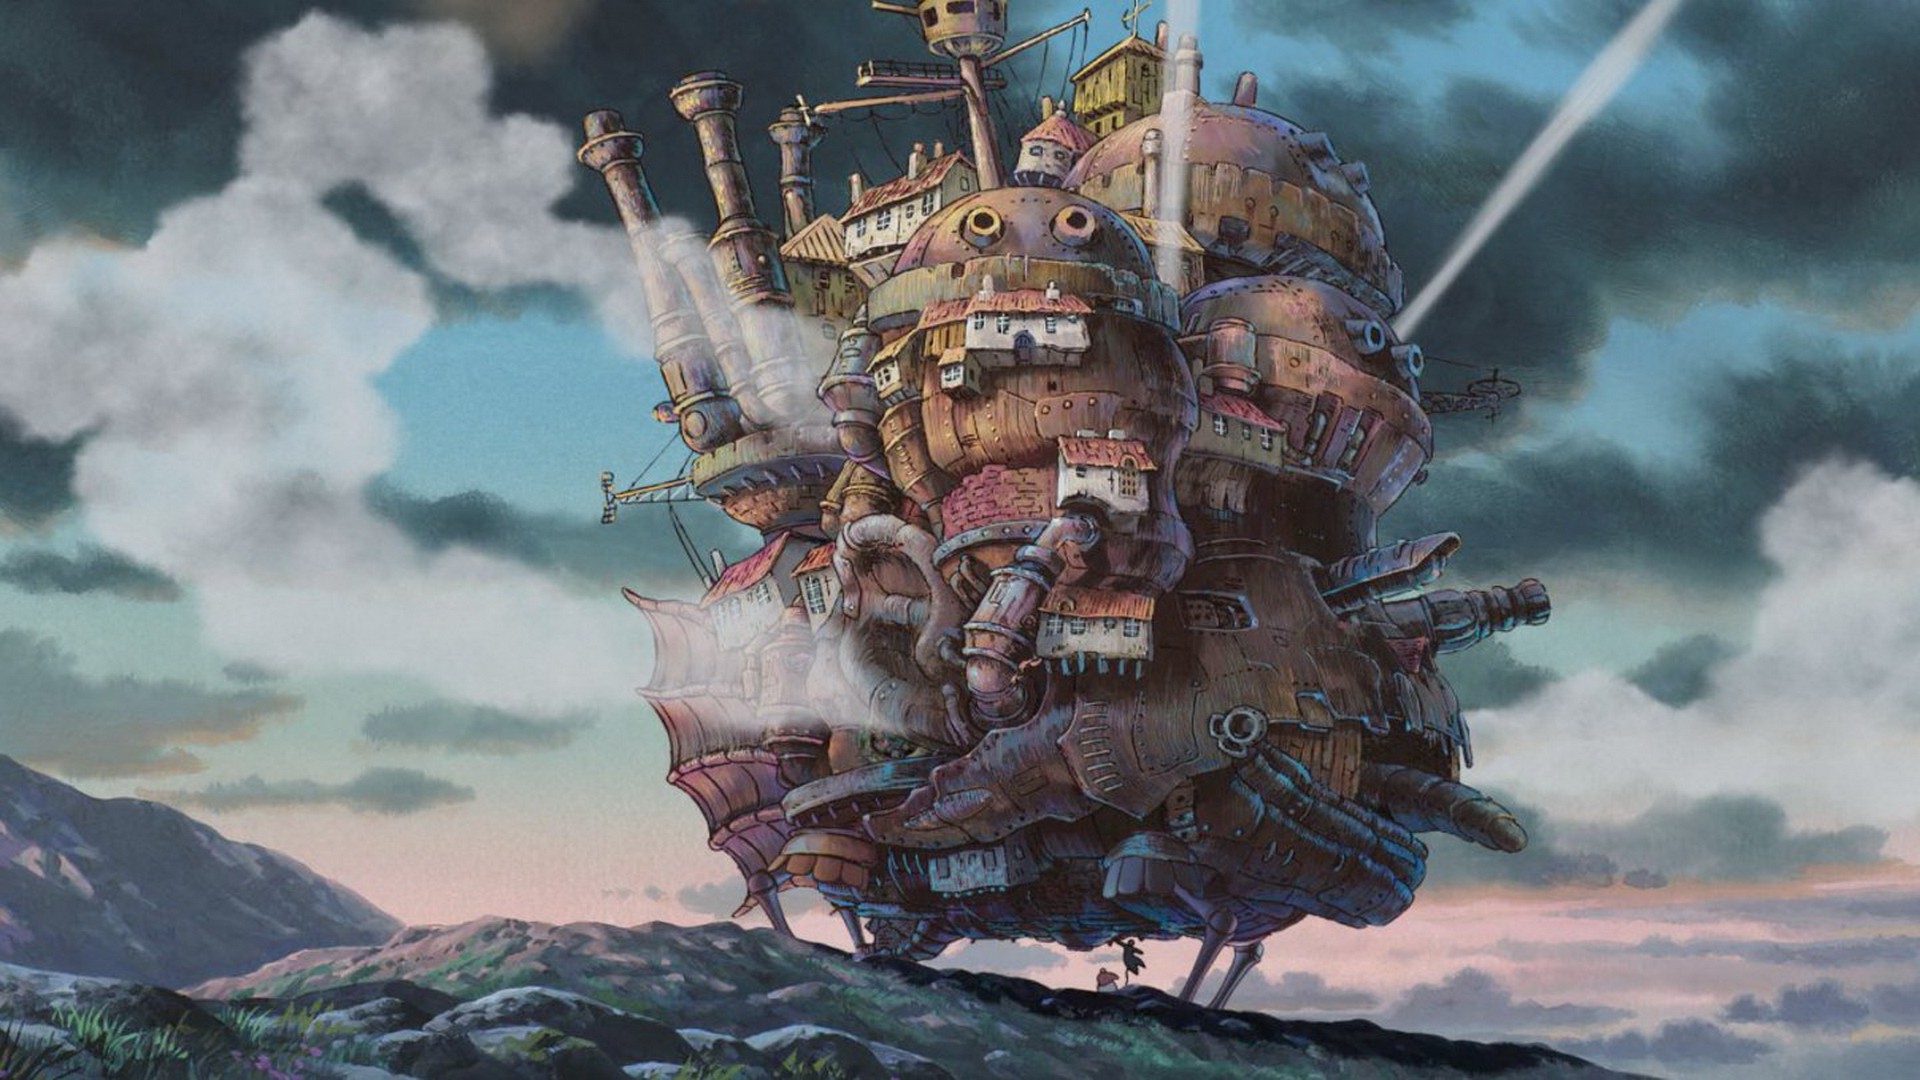 howl's moving castle wallpaper,strategy video game,cg artwork,vehicle,sailing ship,ship